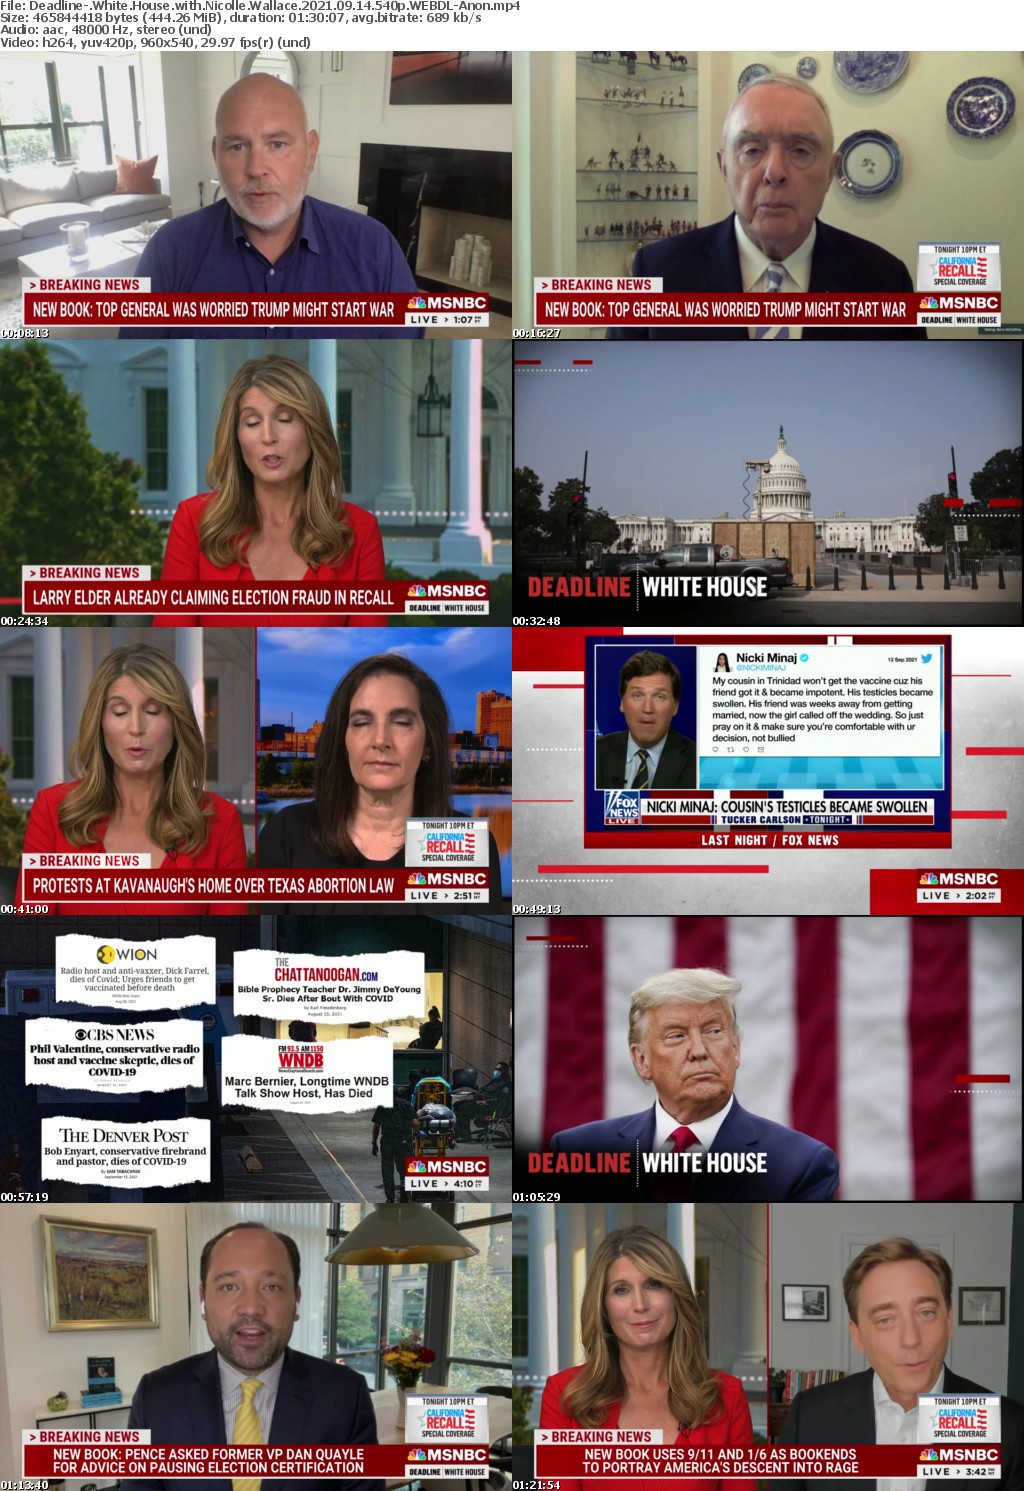 Deadline- White House with Nicolle Wallace 2021 09 14 540p WEBDL-Anon